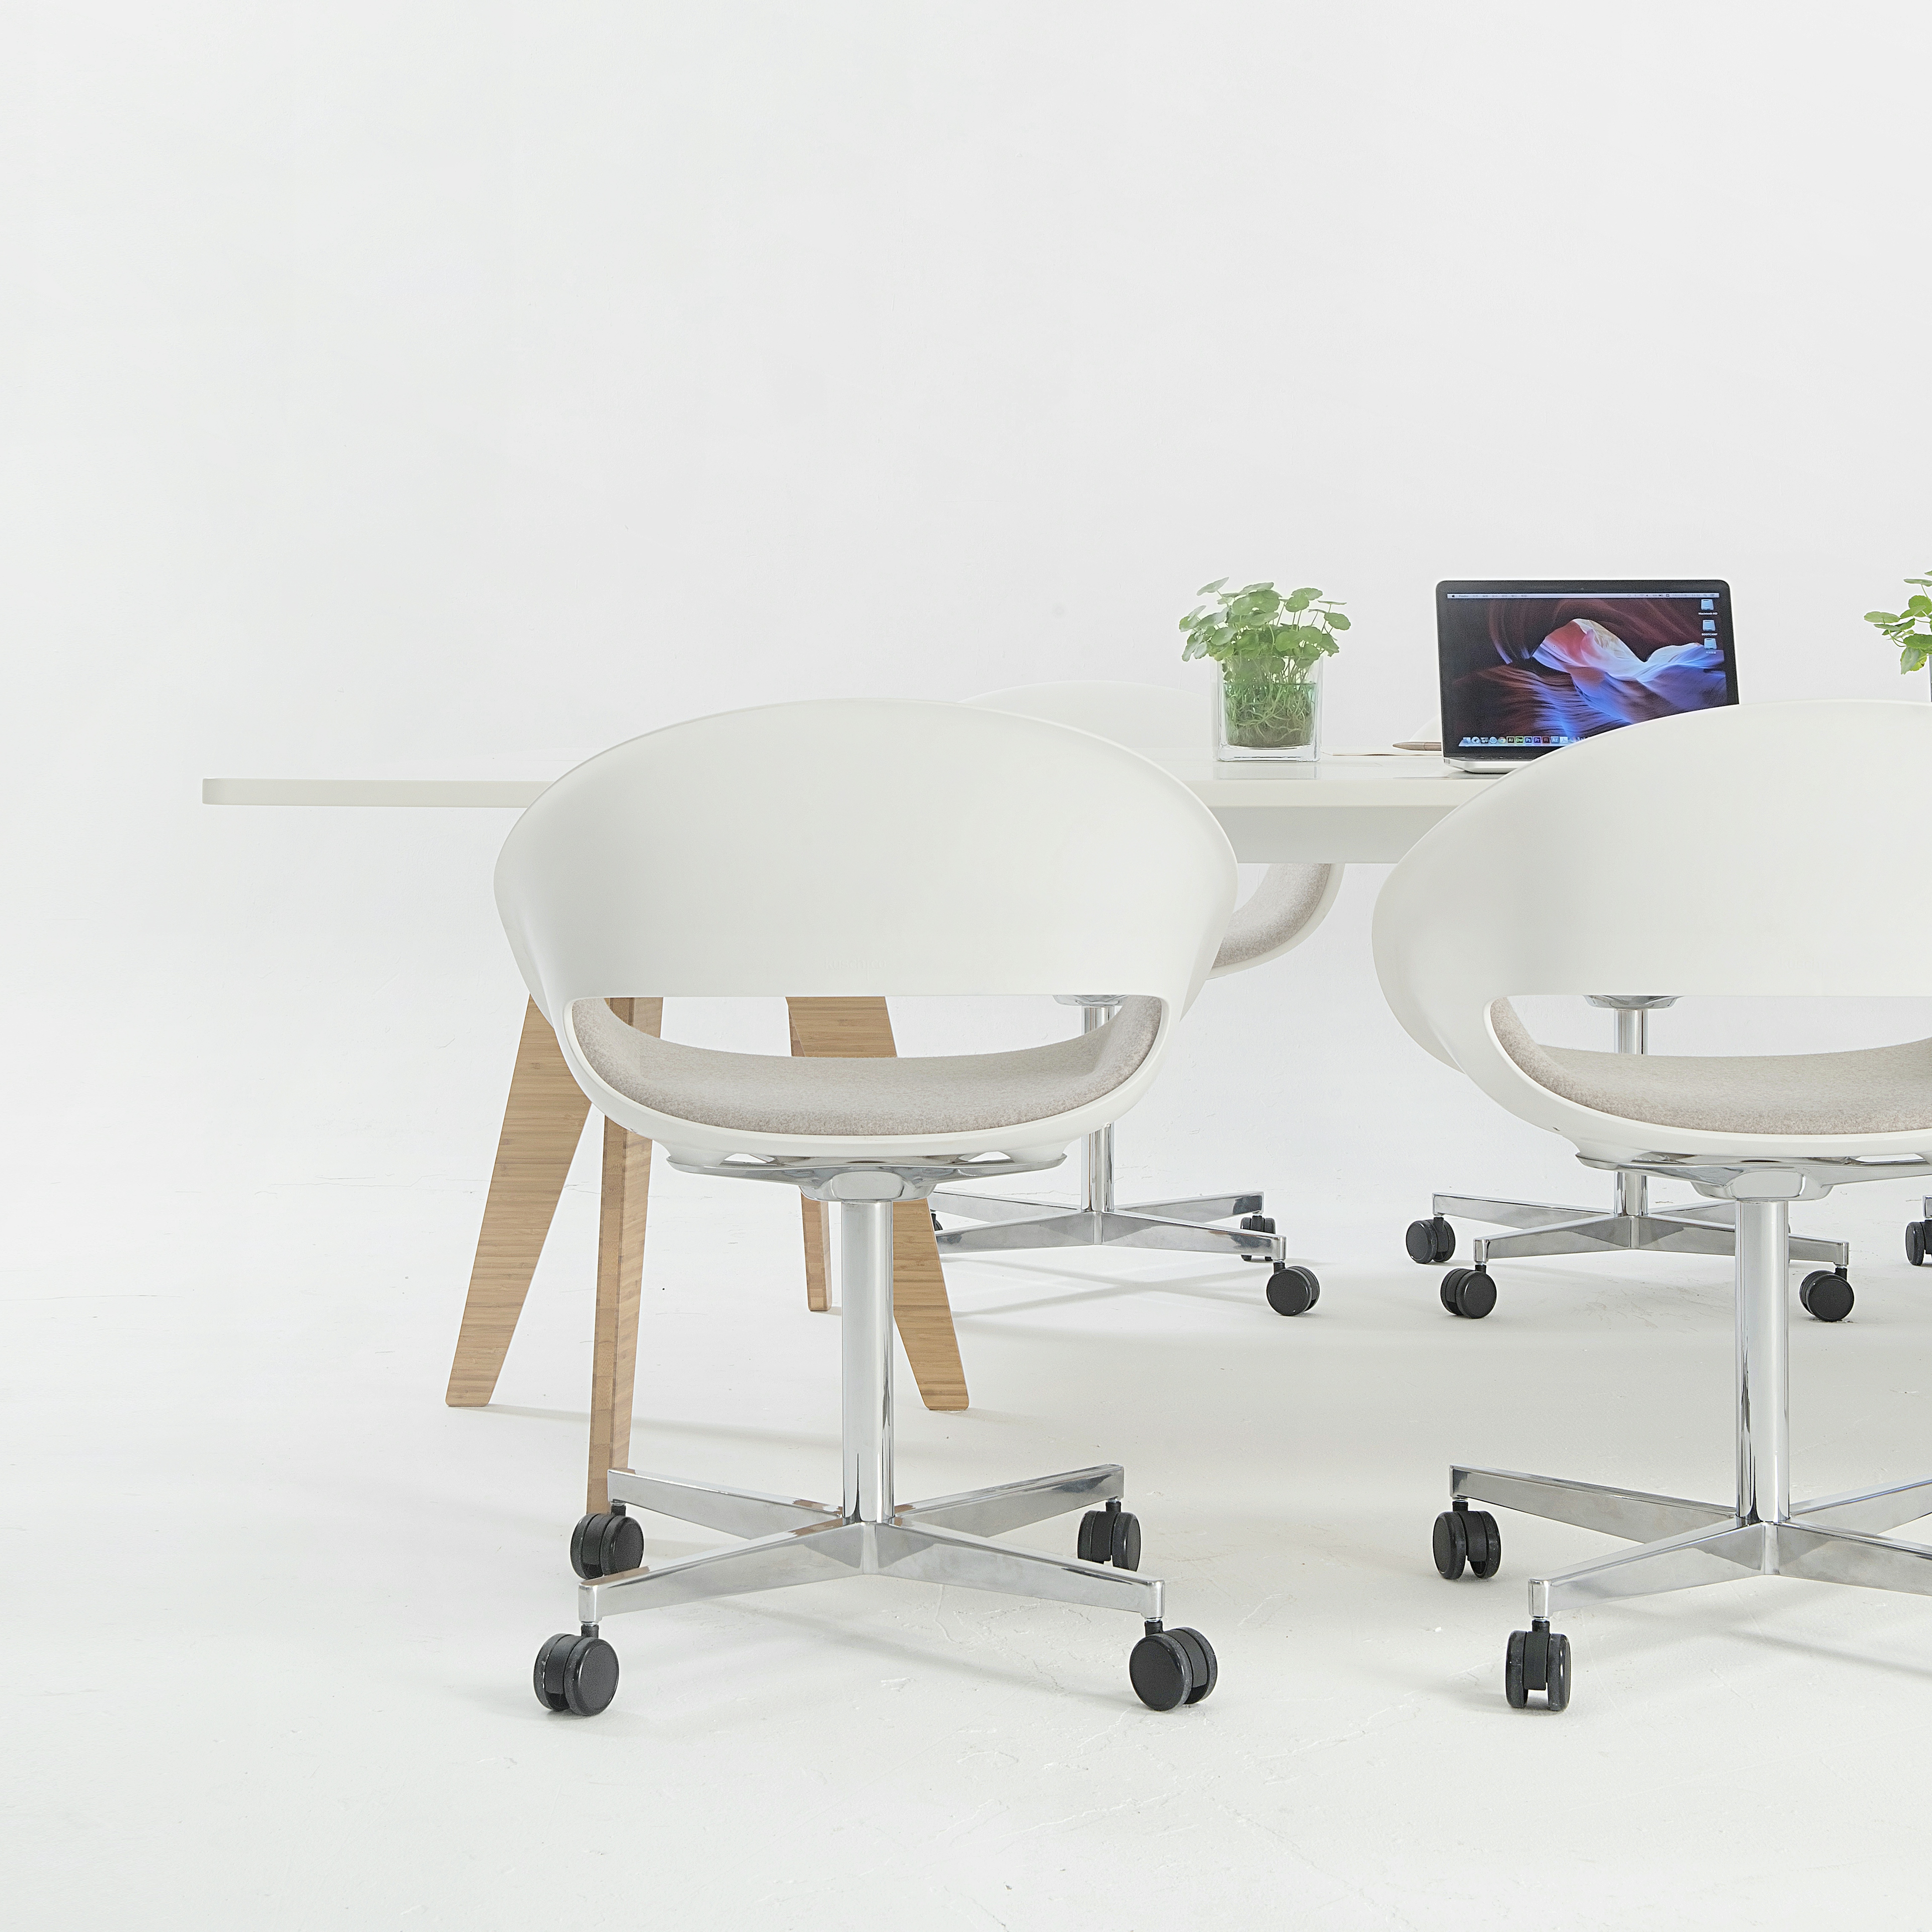 Furniture that features sustainability, modularity, and affordability, as well as a strong aesthetic point of view.